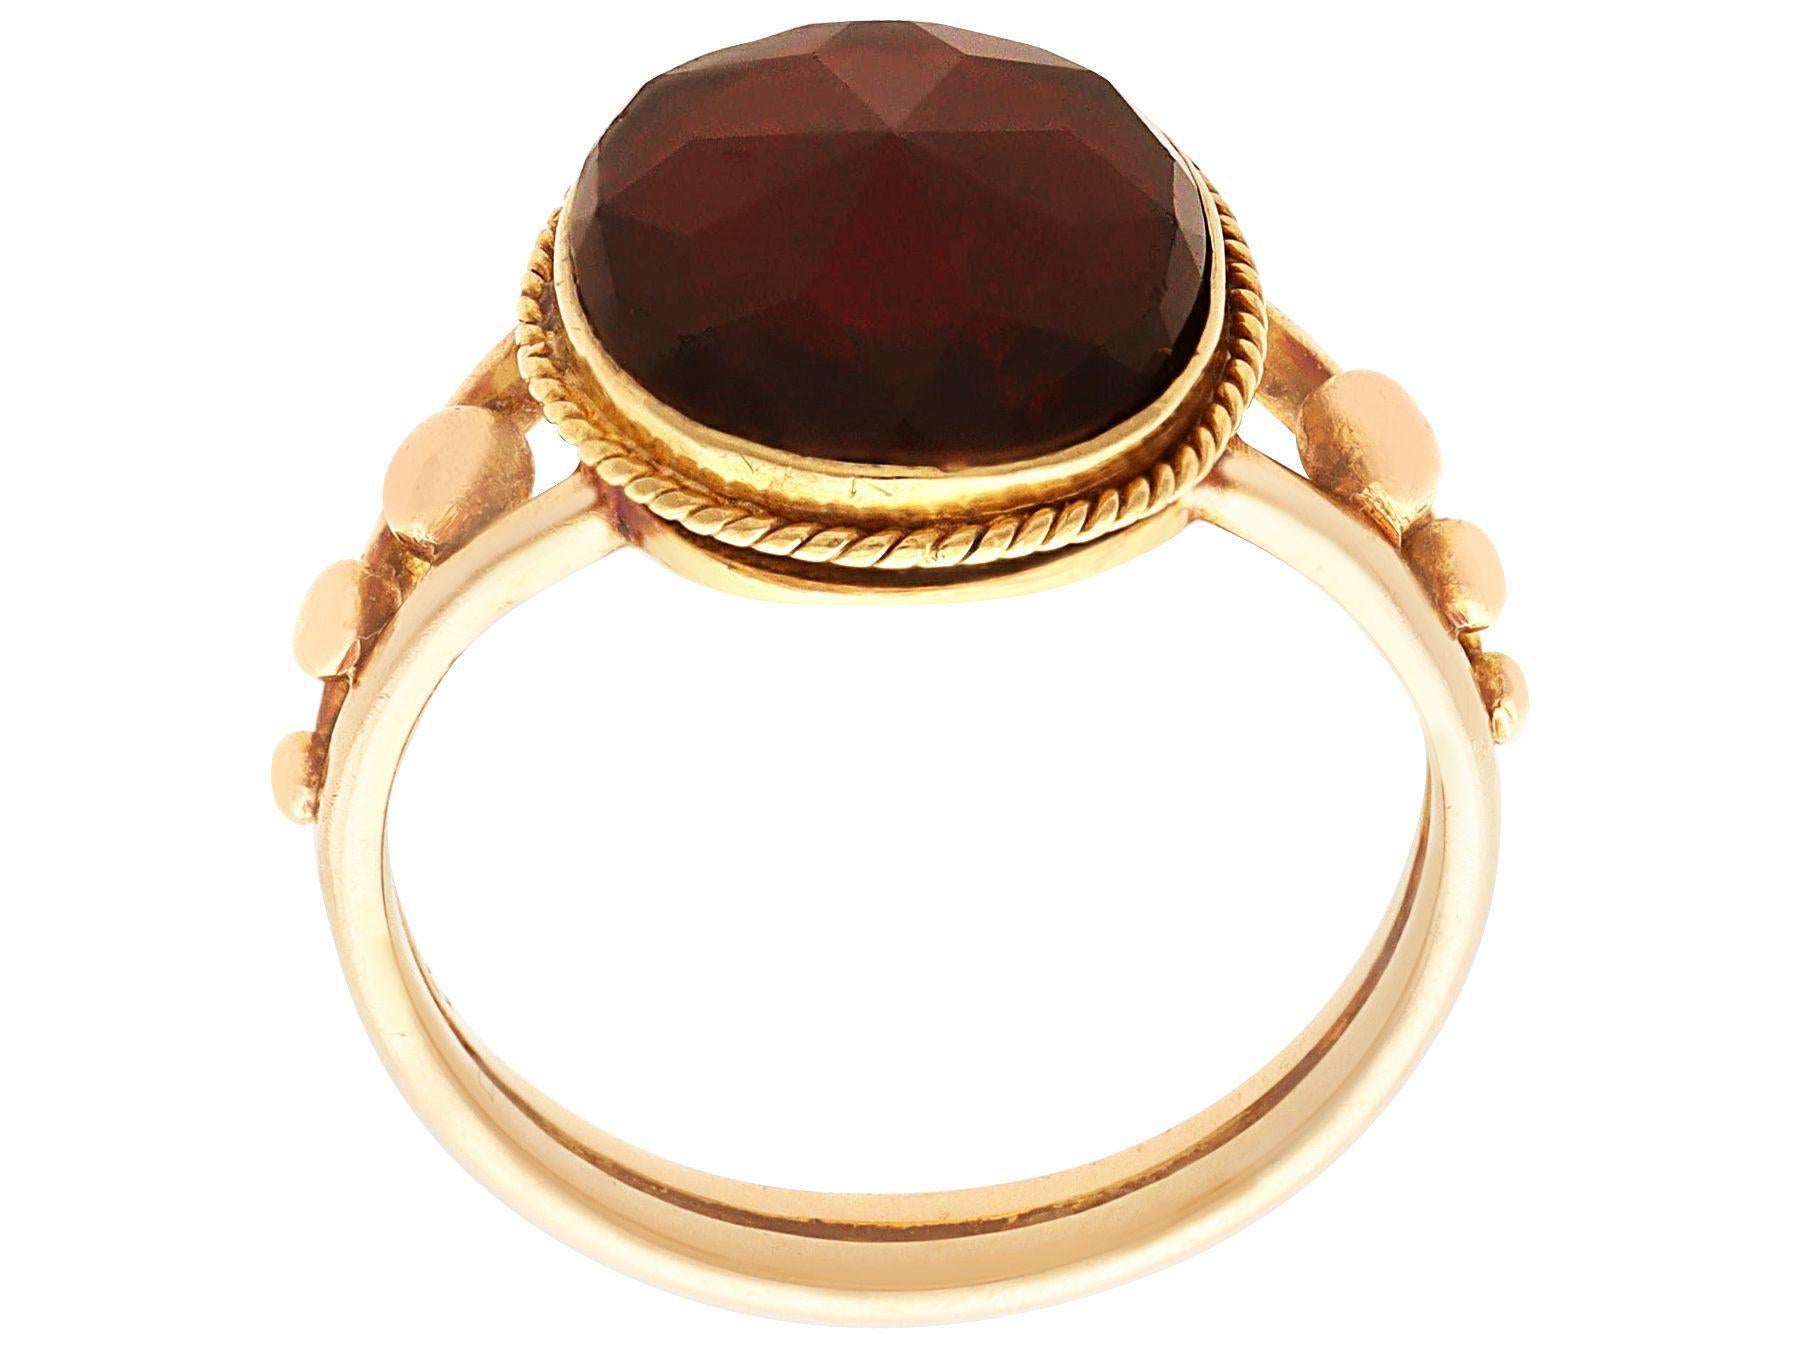 Antique Victorian 4.75 Carat Garnet and Yellow Gold Cocktail Ring In Excellent Condition For Sale In Jesmond, Newcastle Upon Tyne